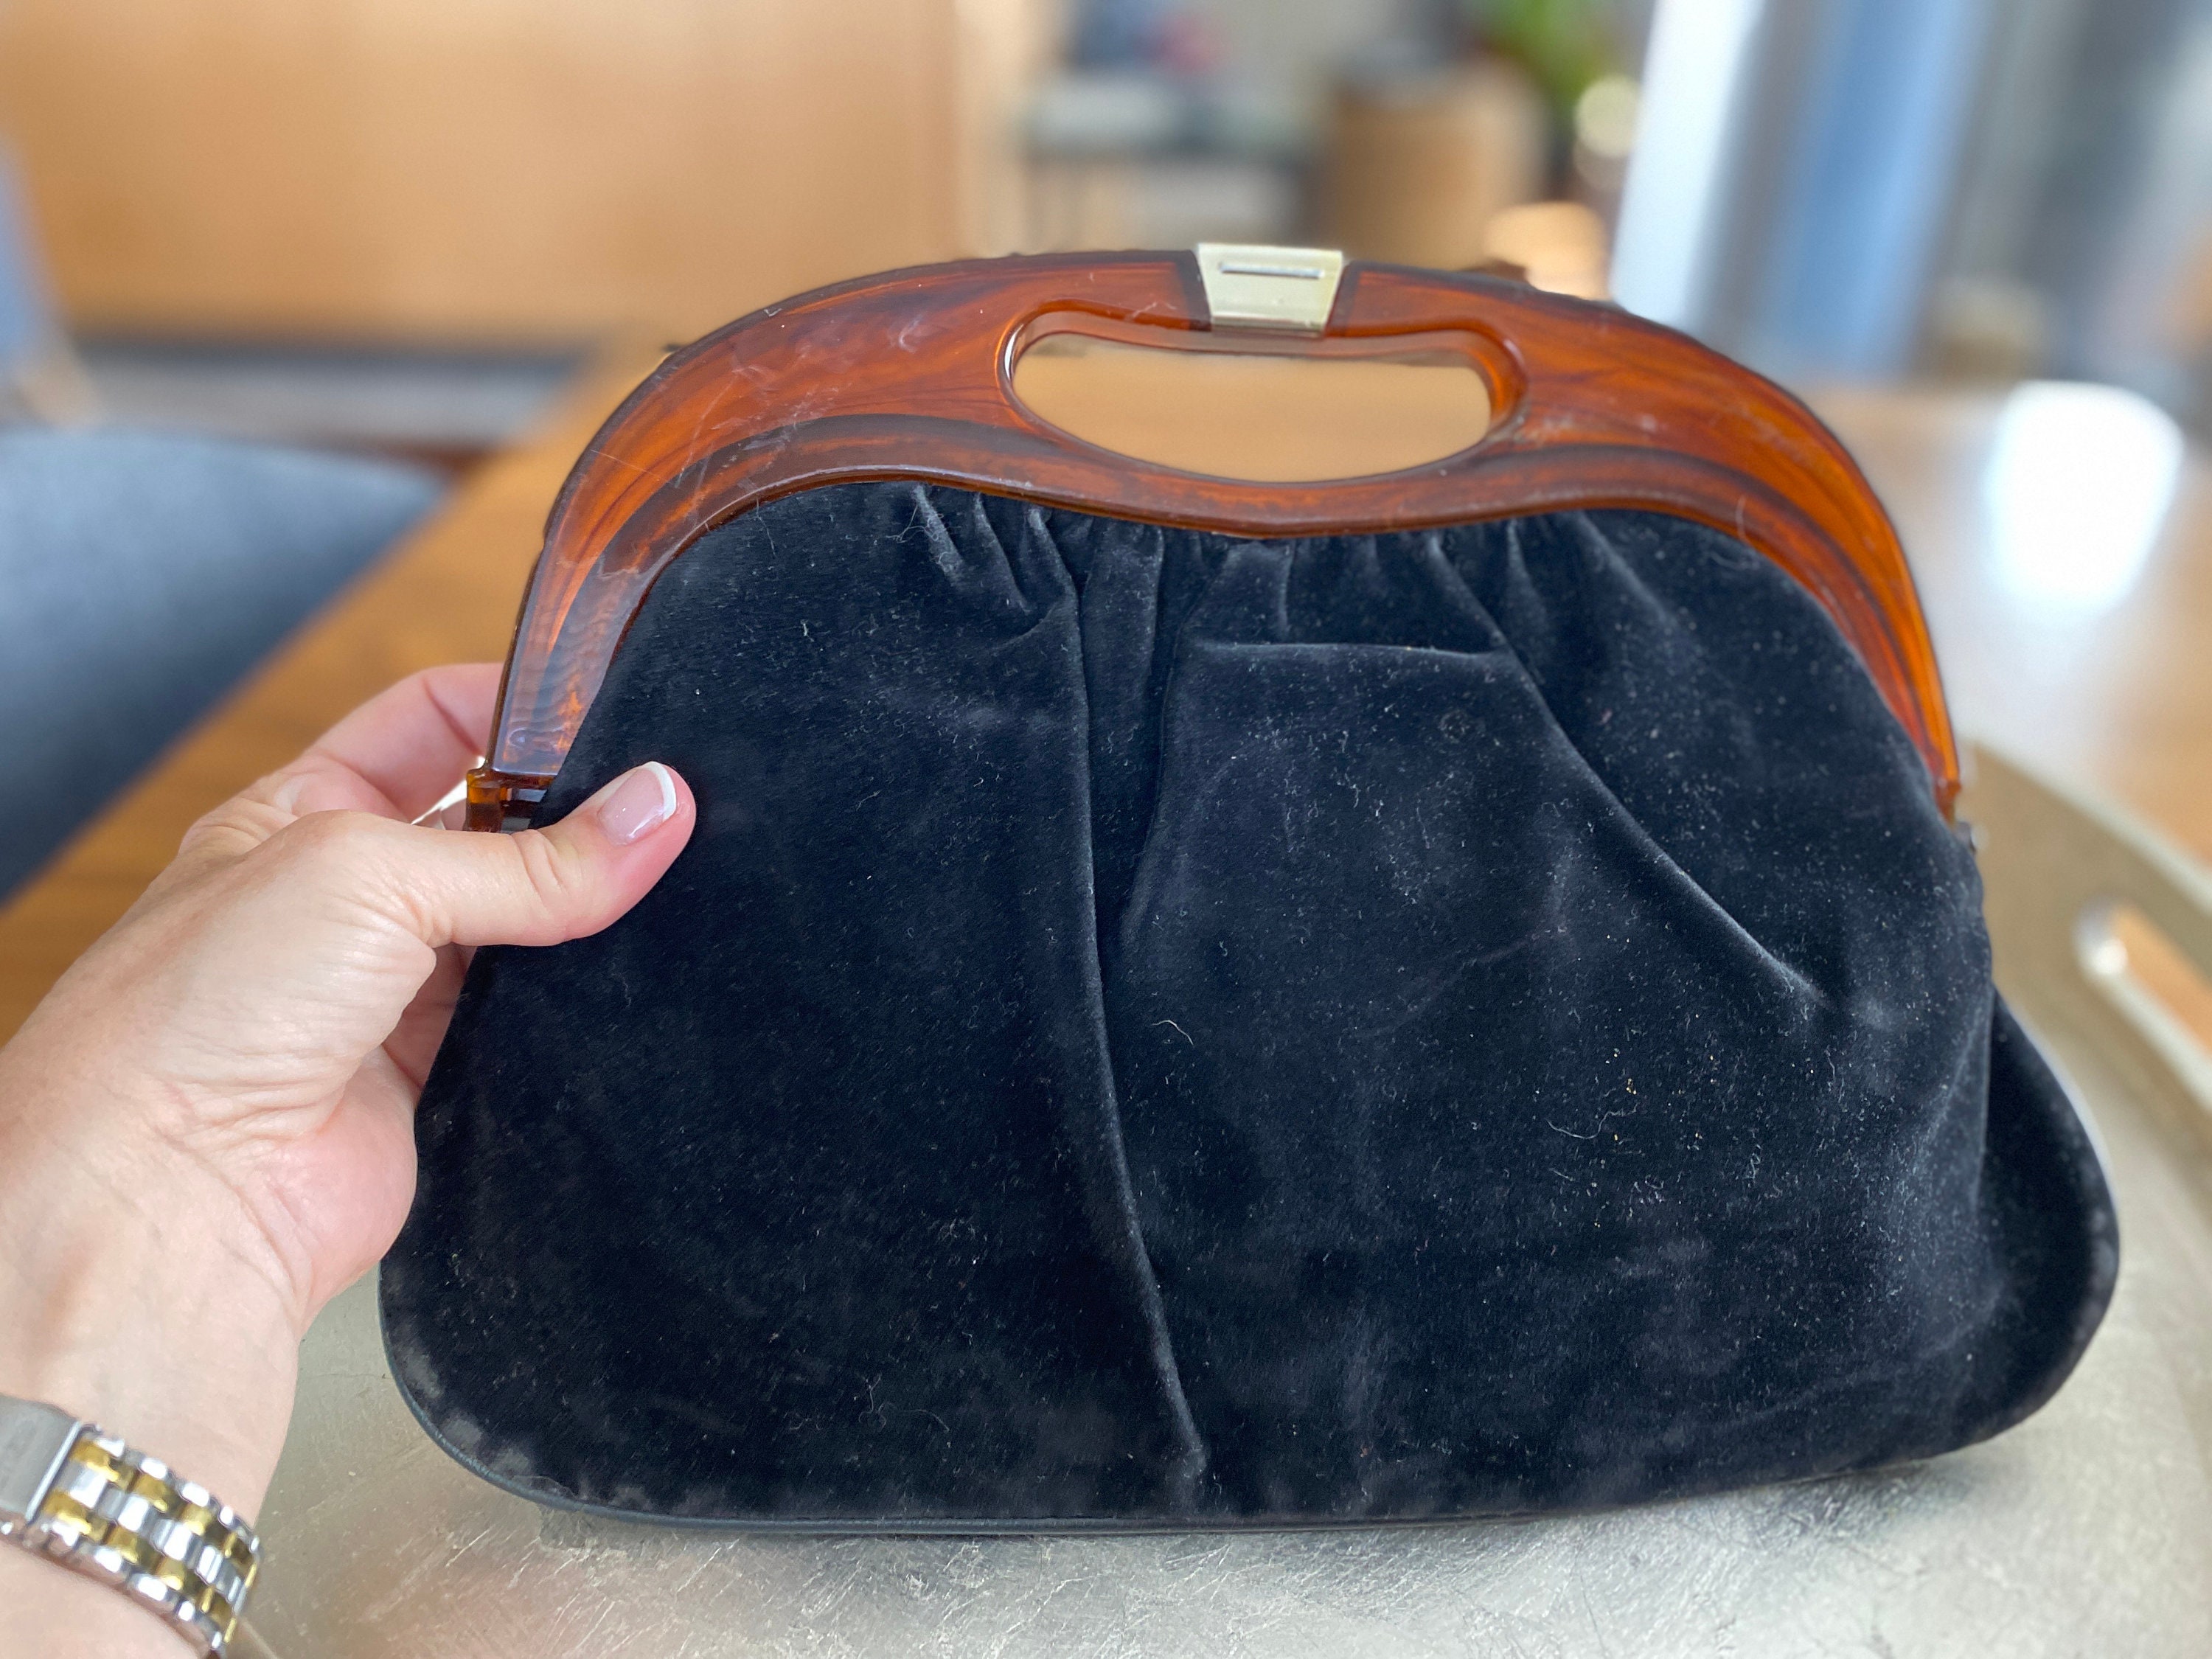 Vintage 70s Widegate Leather Bag, Purse, Black/Brown Patent, Unused, Lucite Top Handle in Faux Tortoiseshell, Very On Trend, Made in England